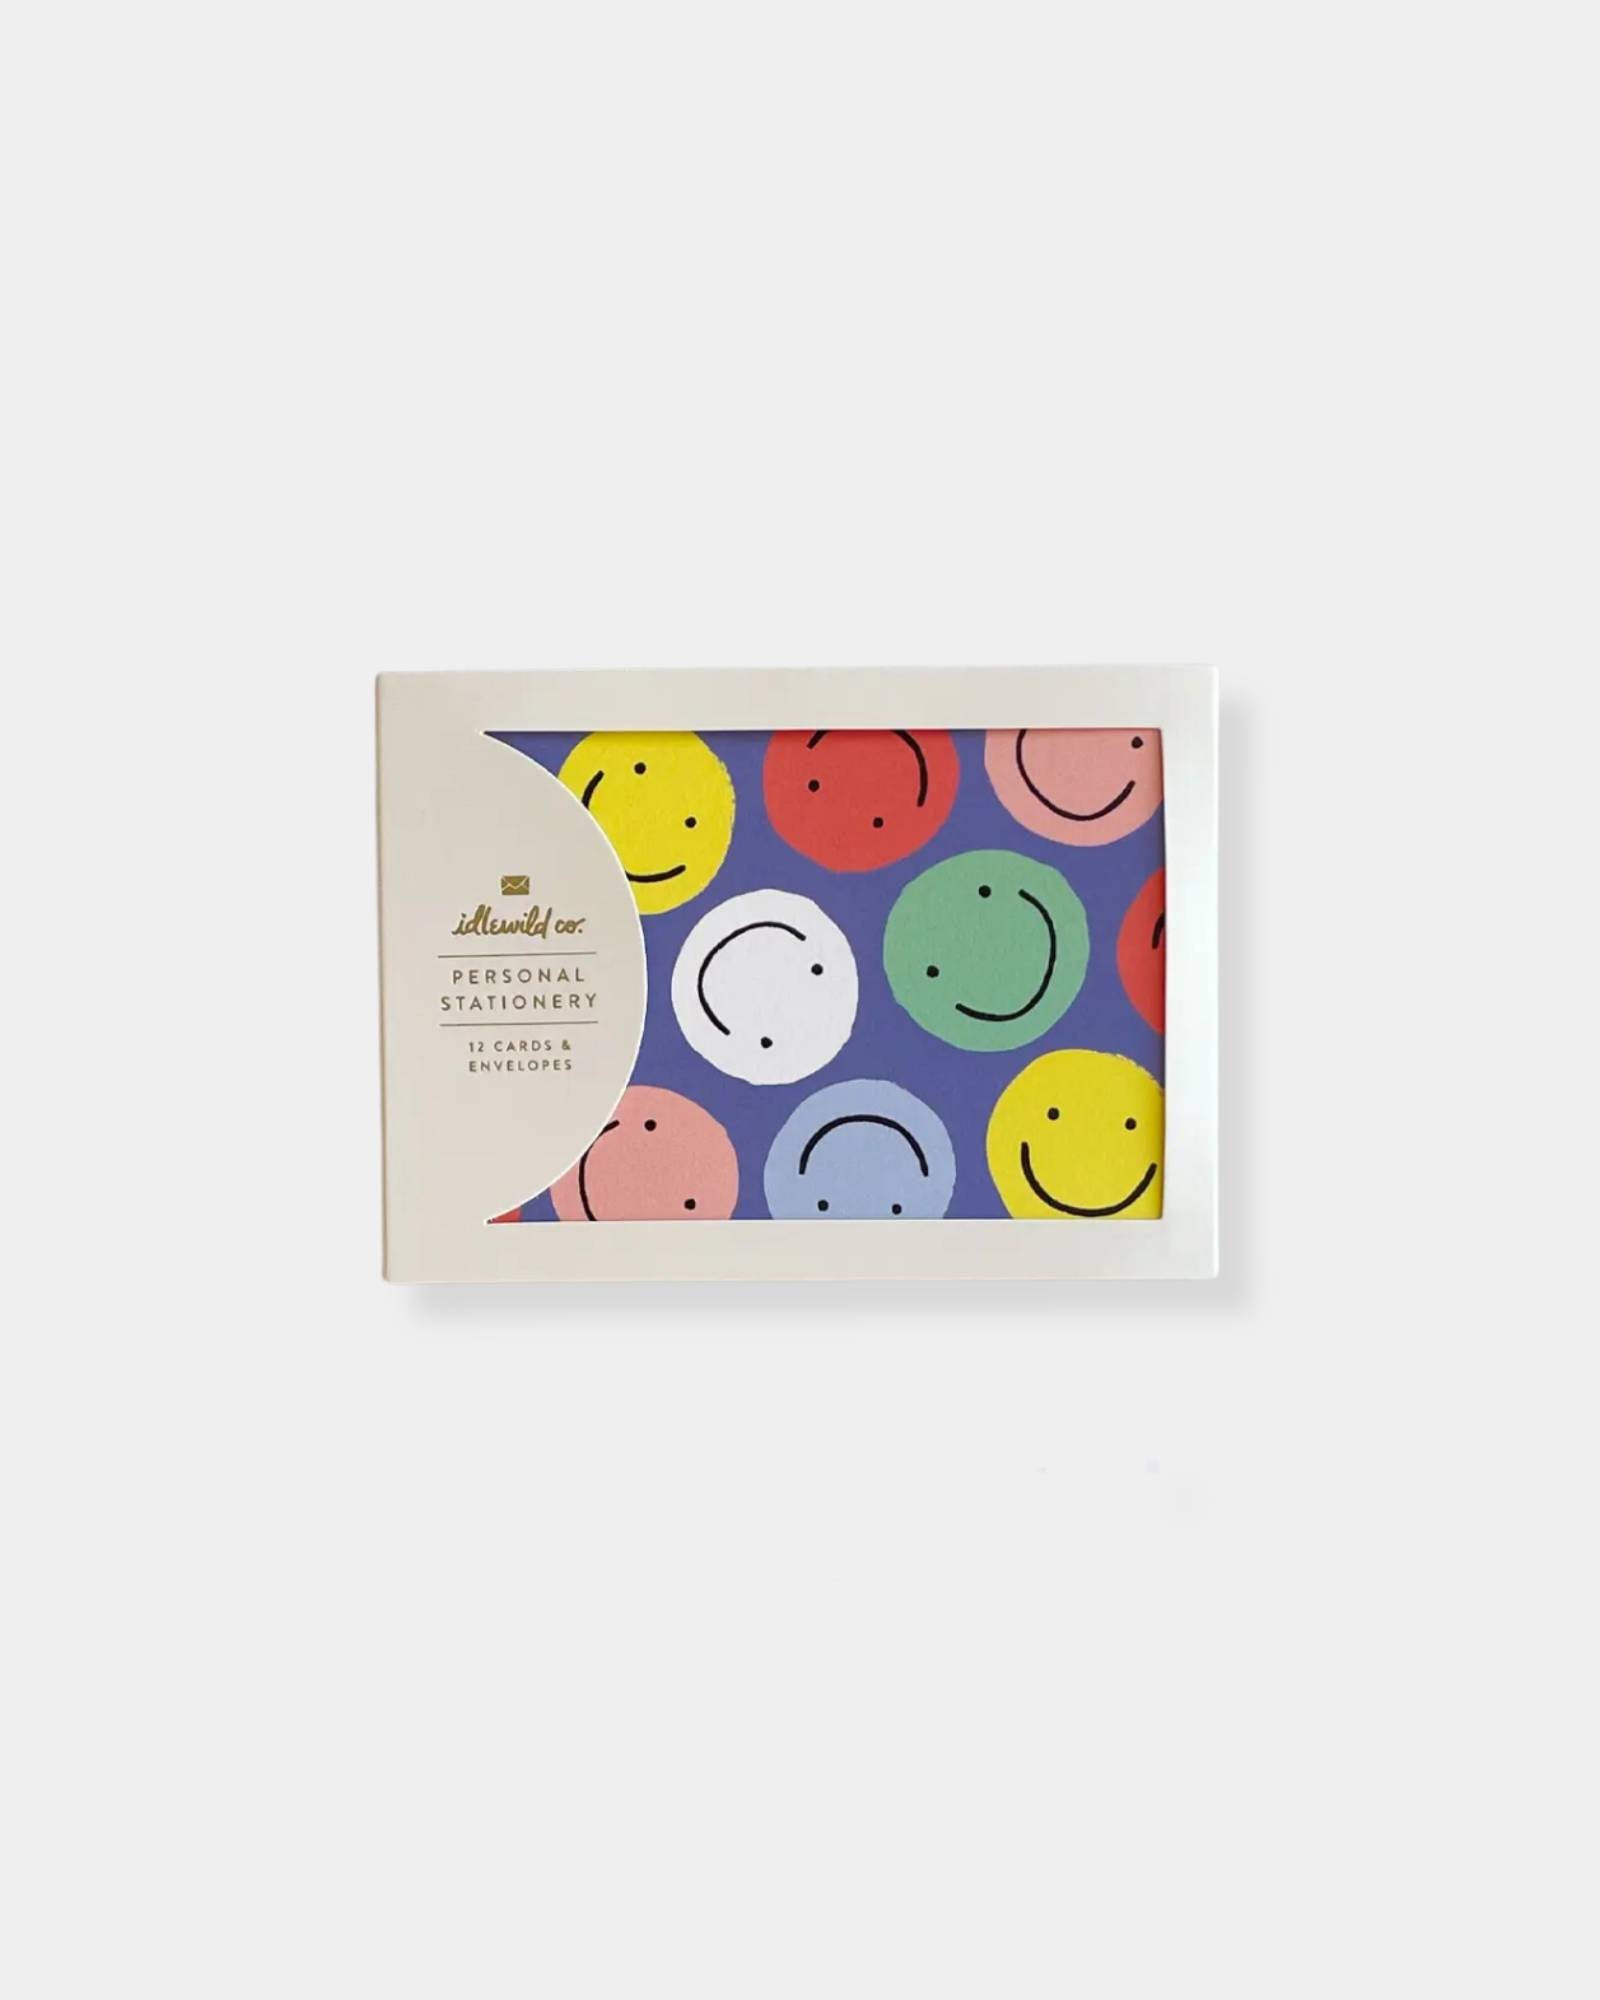 SMILEYS CARDS - BOXED SET 12